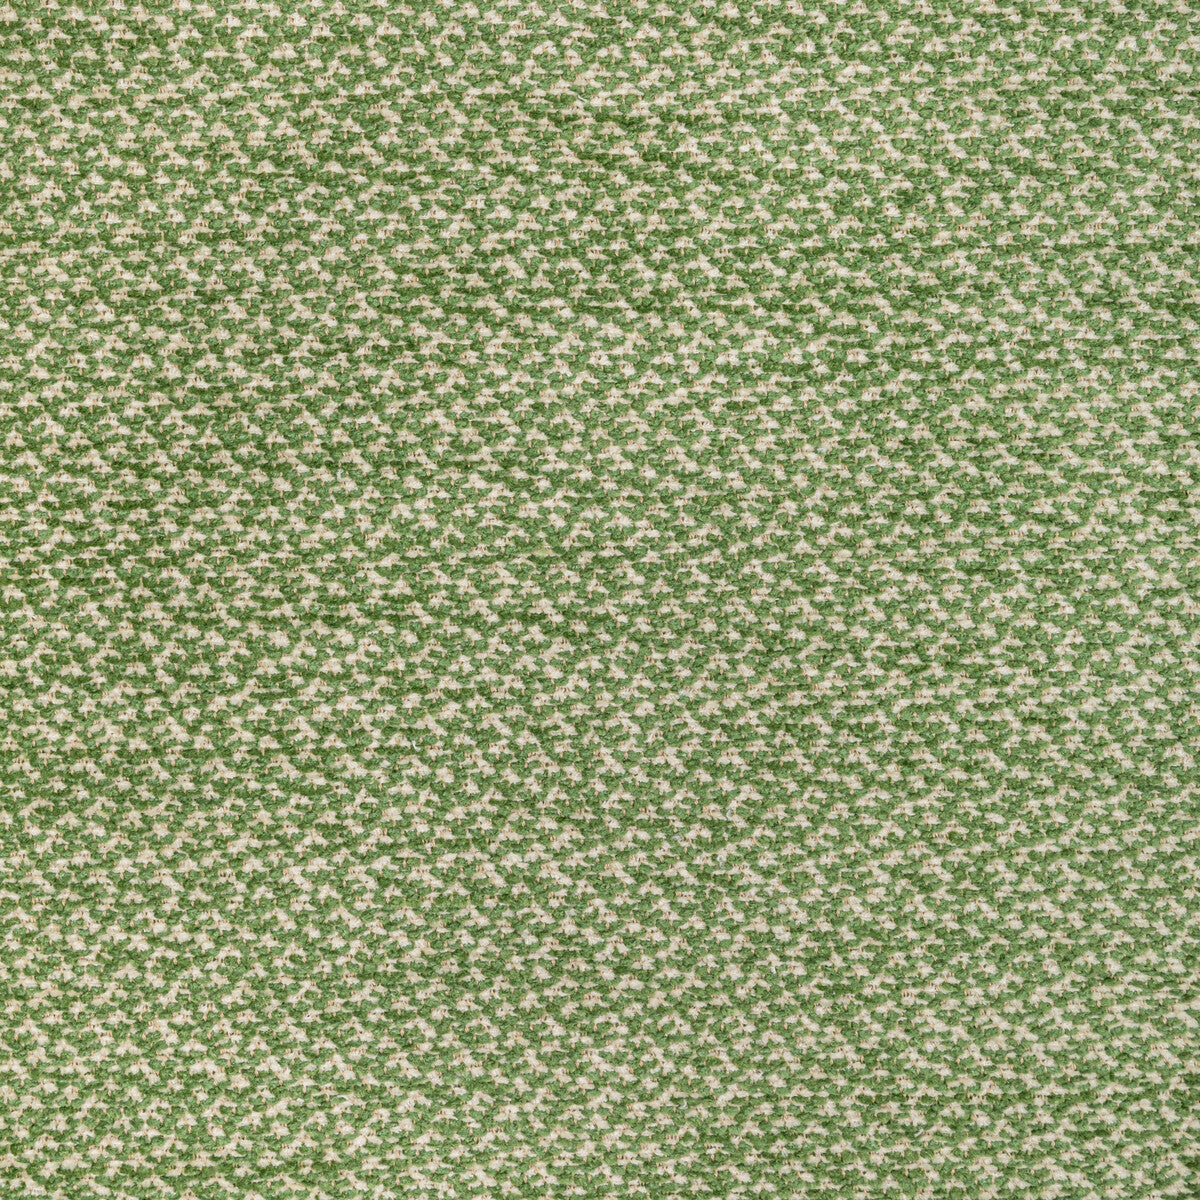 Sasson Texture fabric in green color - pattern 8022122.3.0 - by Brunschwig &amp; Fils in the Chambery Textures III collection